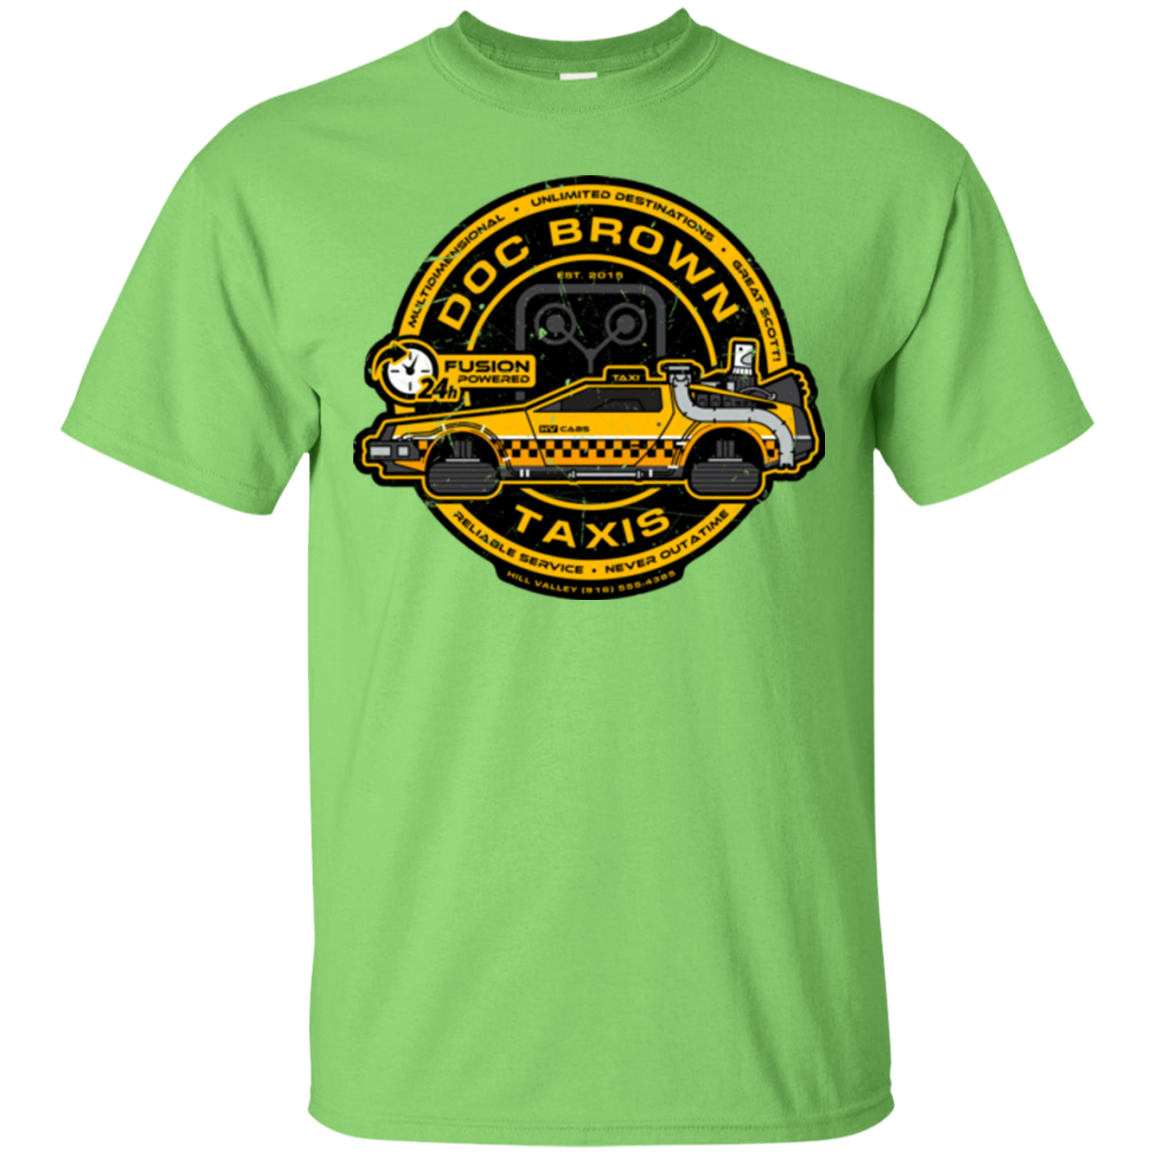 Doc Brown Taxis T-Shirt